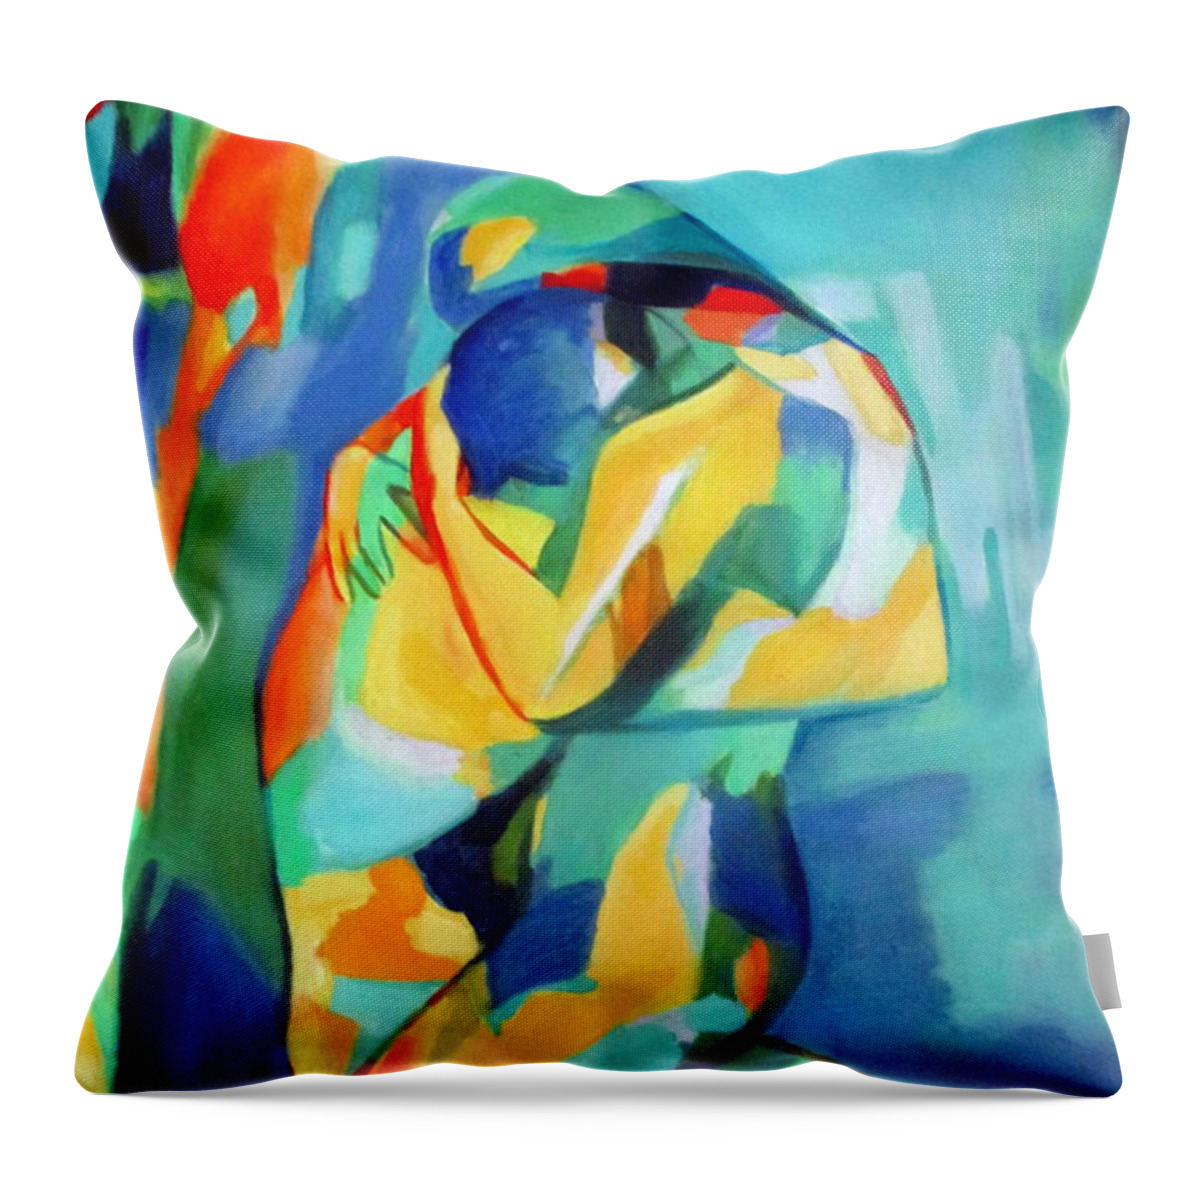 Affordable Paintings For Sale Throw Pillow featuring the painting Embrace by Helena Wierzbicki